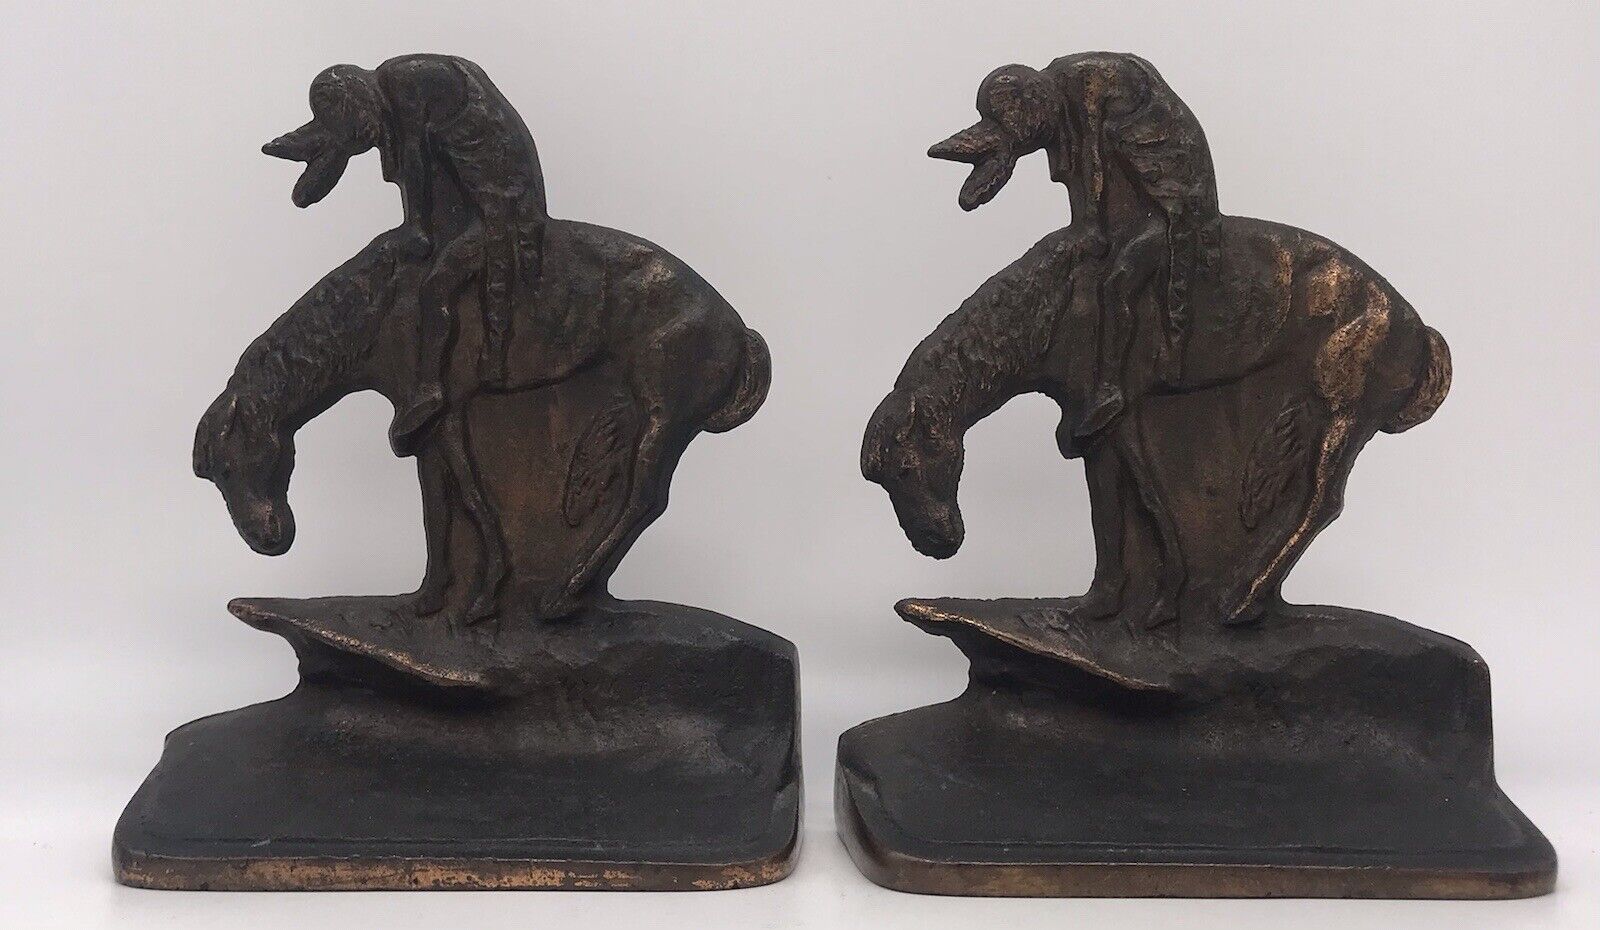 1928, The Last Trail Bookends